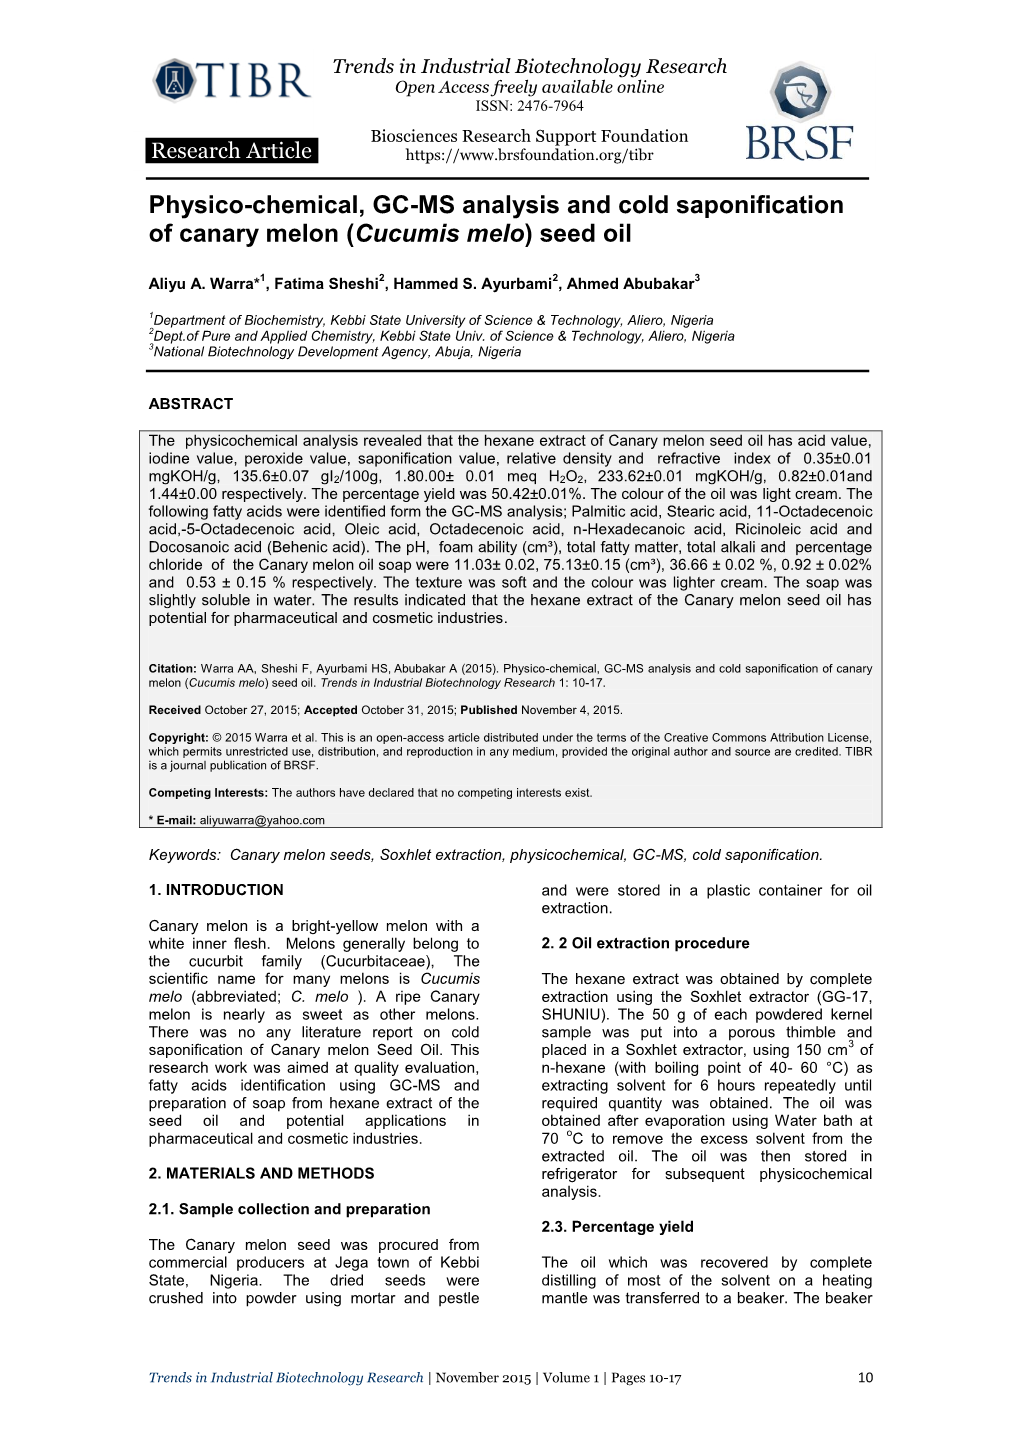 Physico-Chemical, GC-MS Analysis and Cold Saponification of Canary Melon (Cucumis Melo) Seed Oil